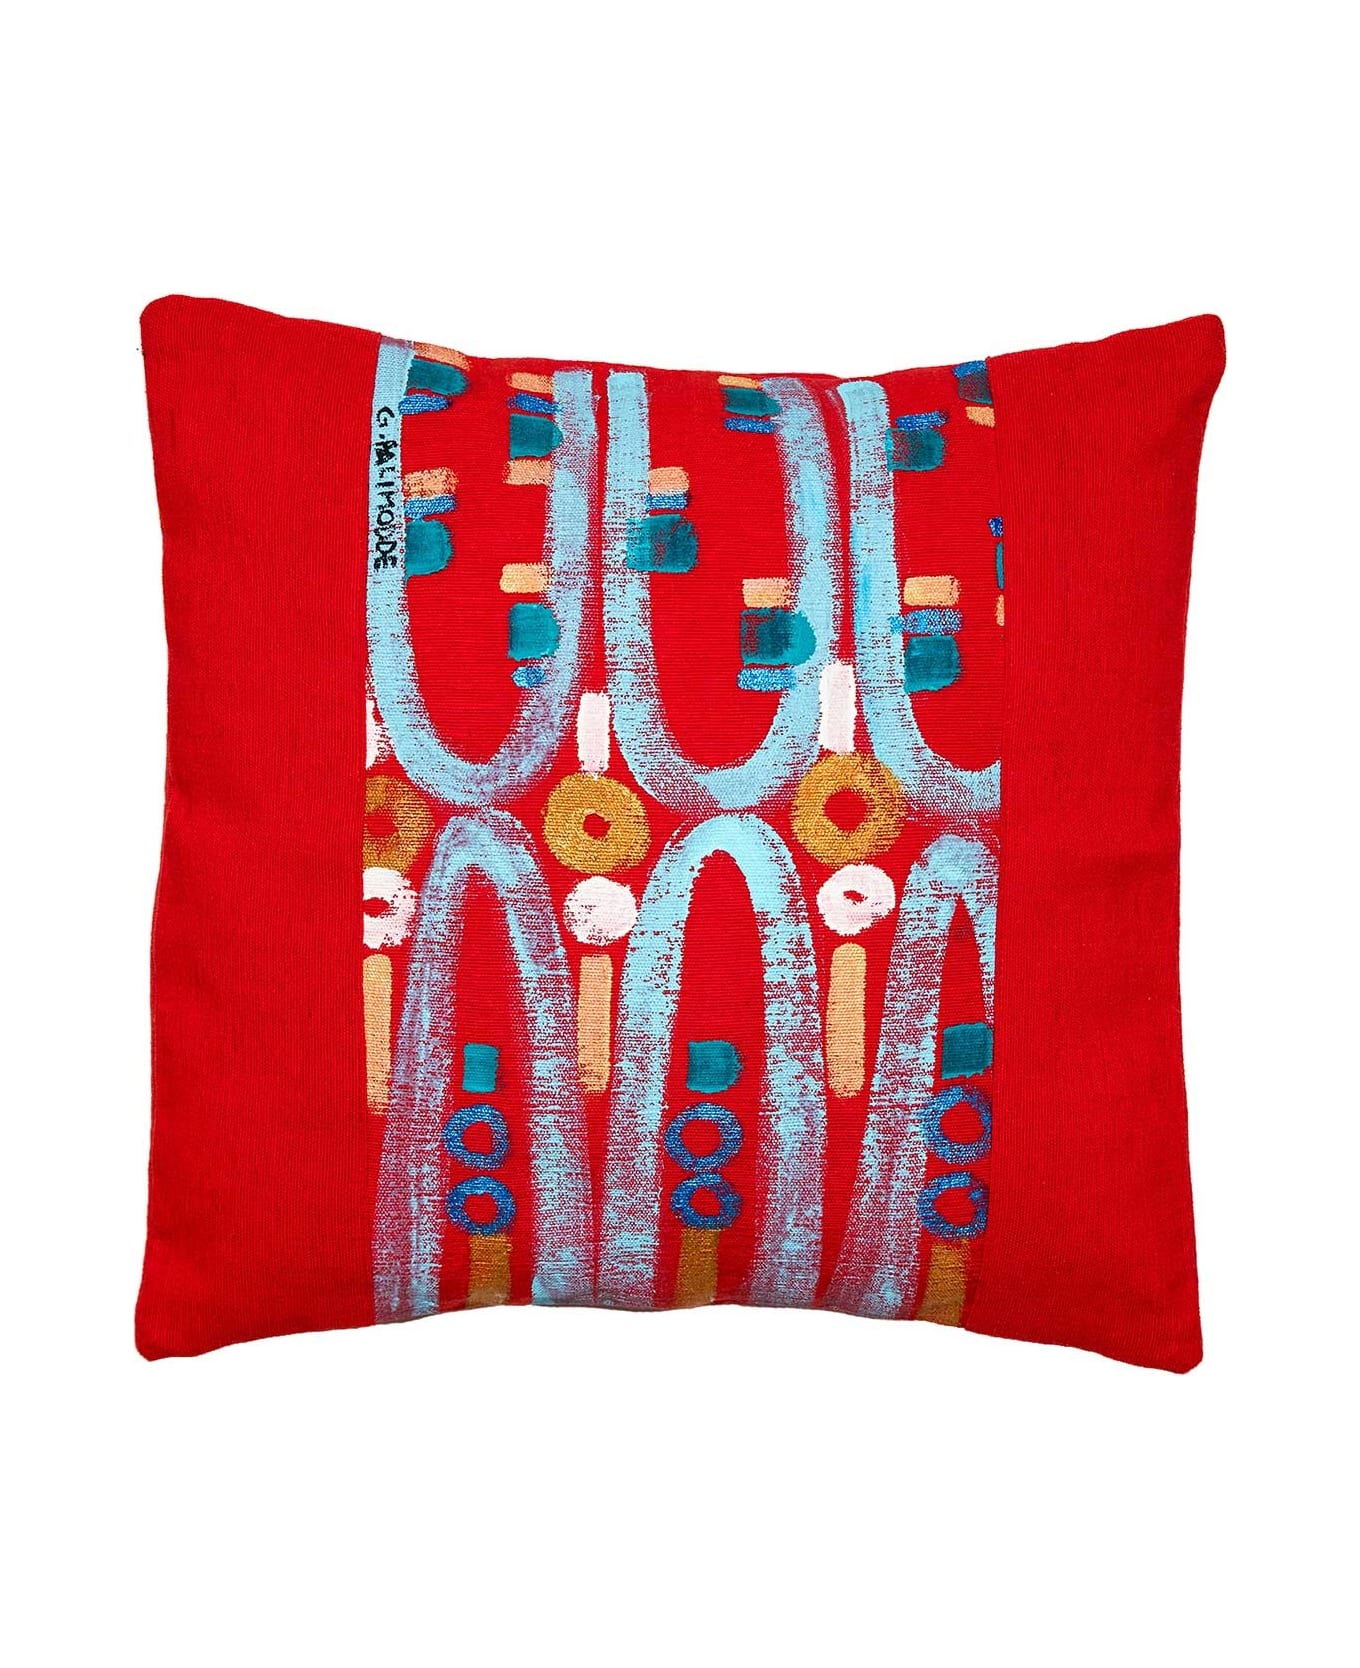 Le Botteghe su Gologone Hand Painted Cushions 70x70 Cm - Red Fantasy クッション